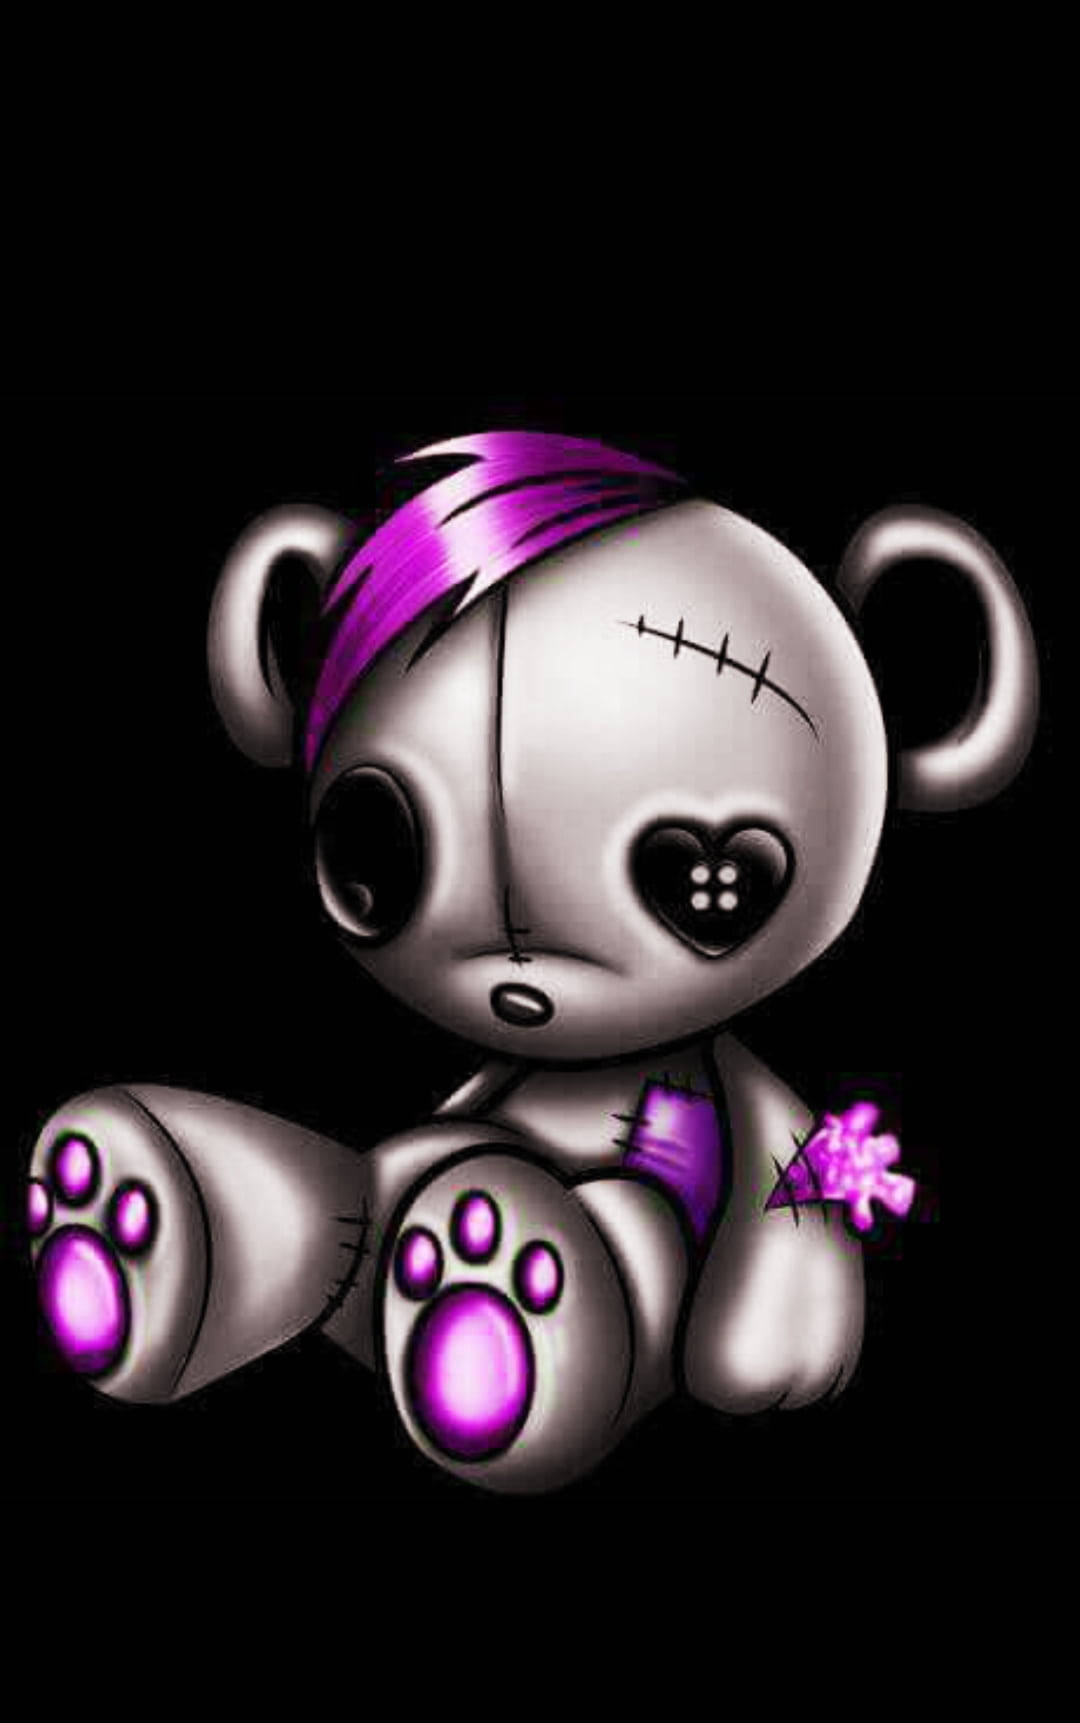 Gothteddy Bear Pfp Would Be Translated To 